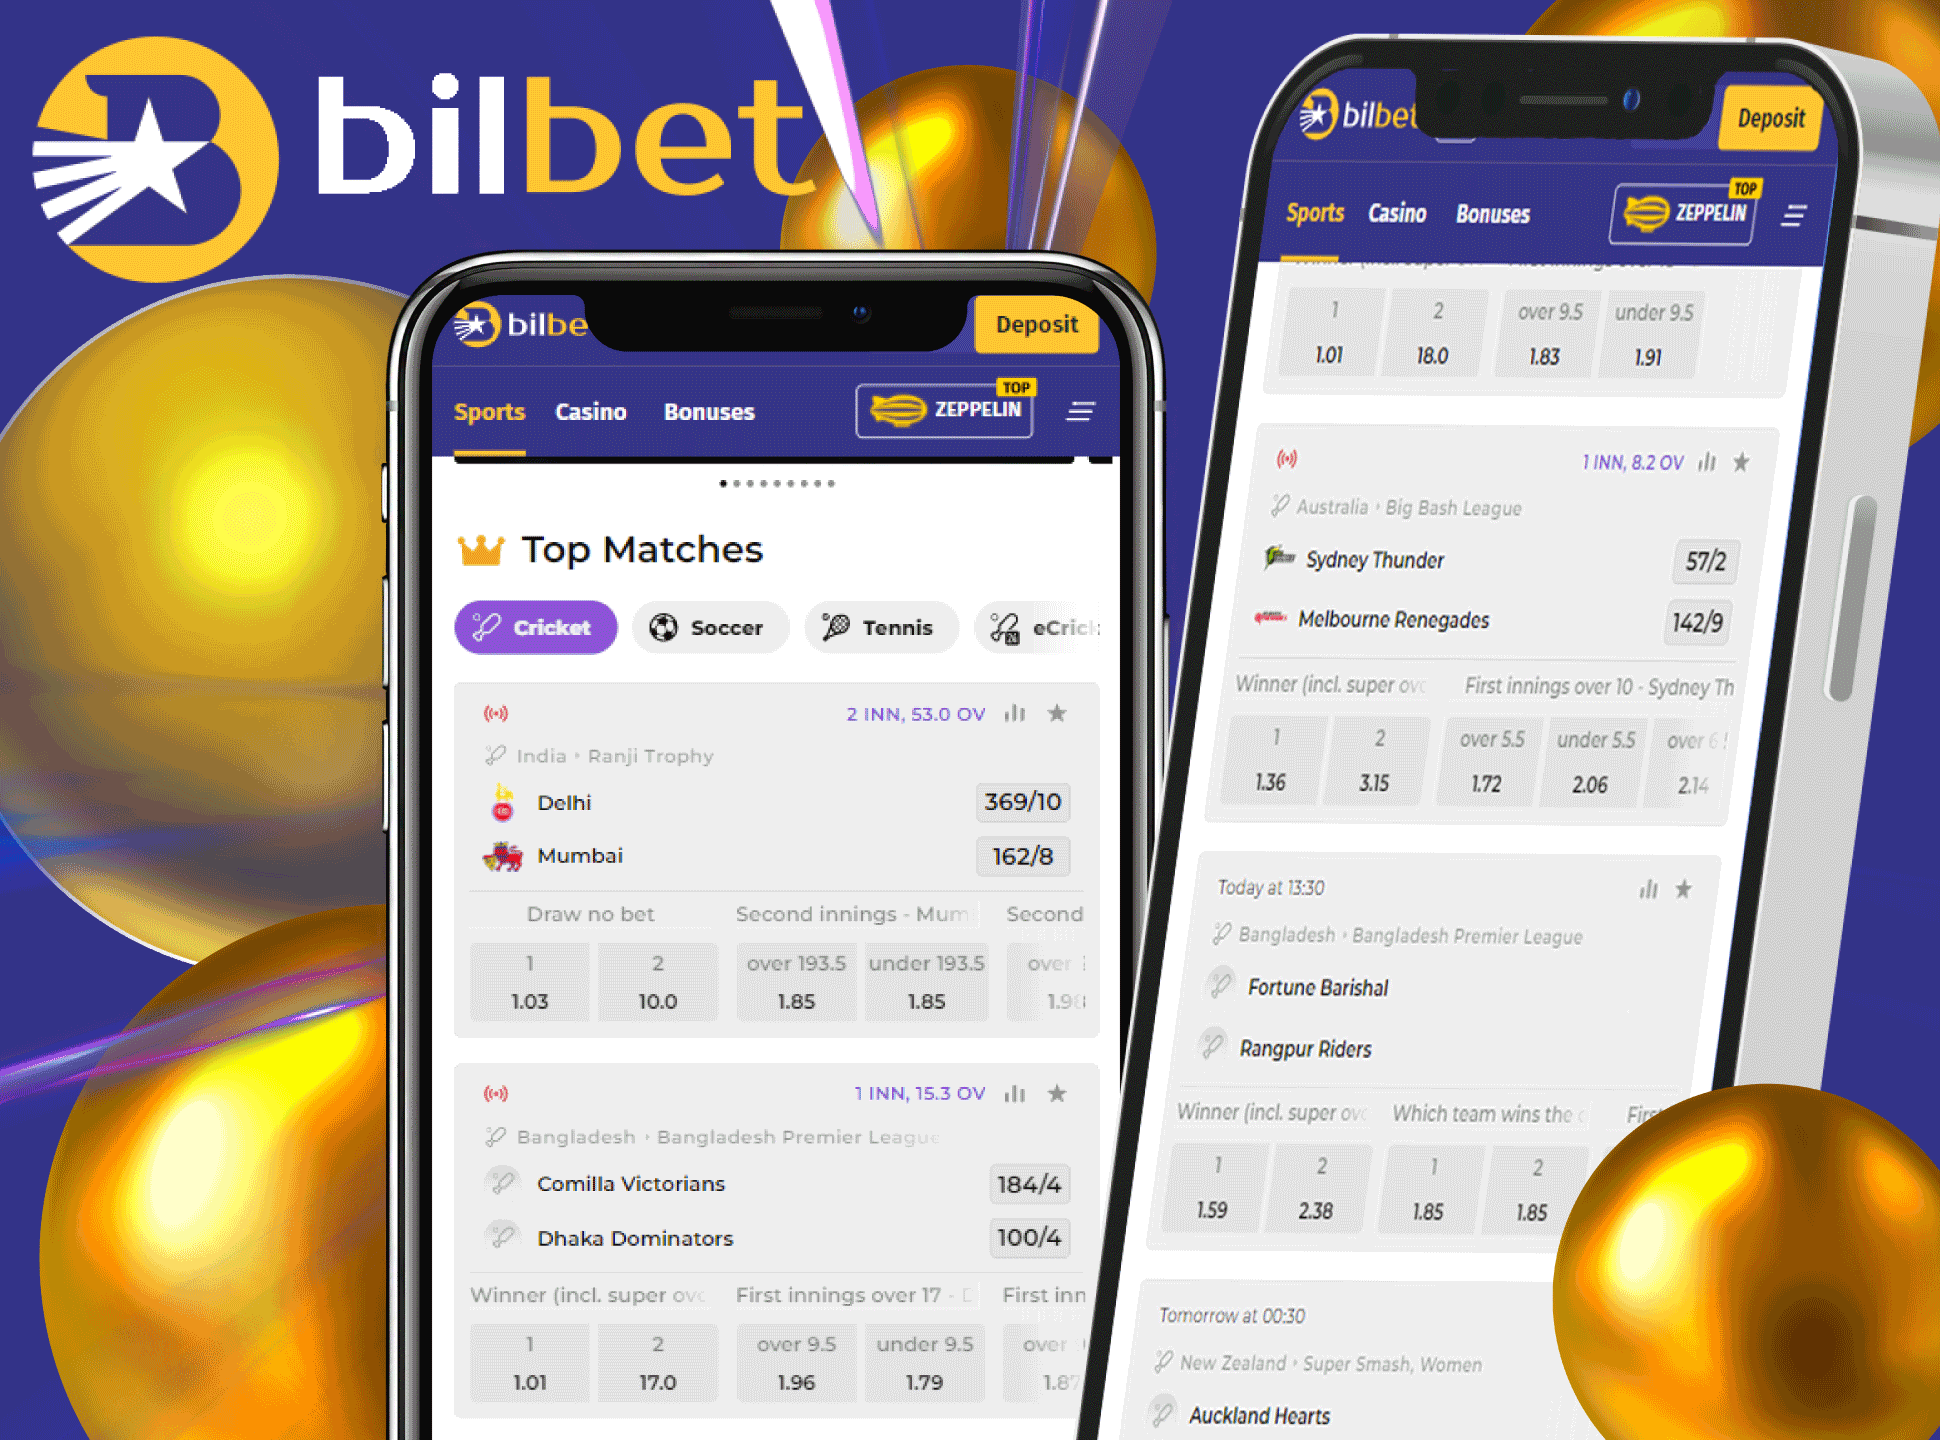 If you don't want to download the app you can use the mobile version of Bilbet.